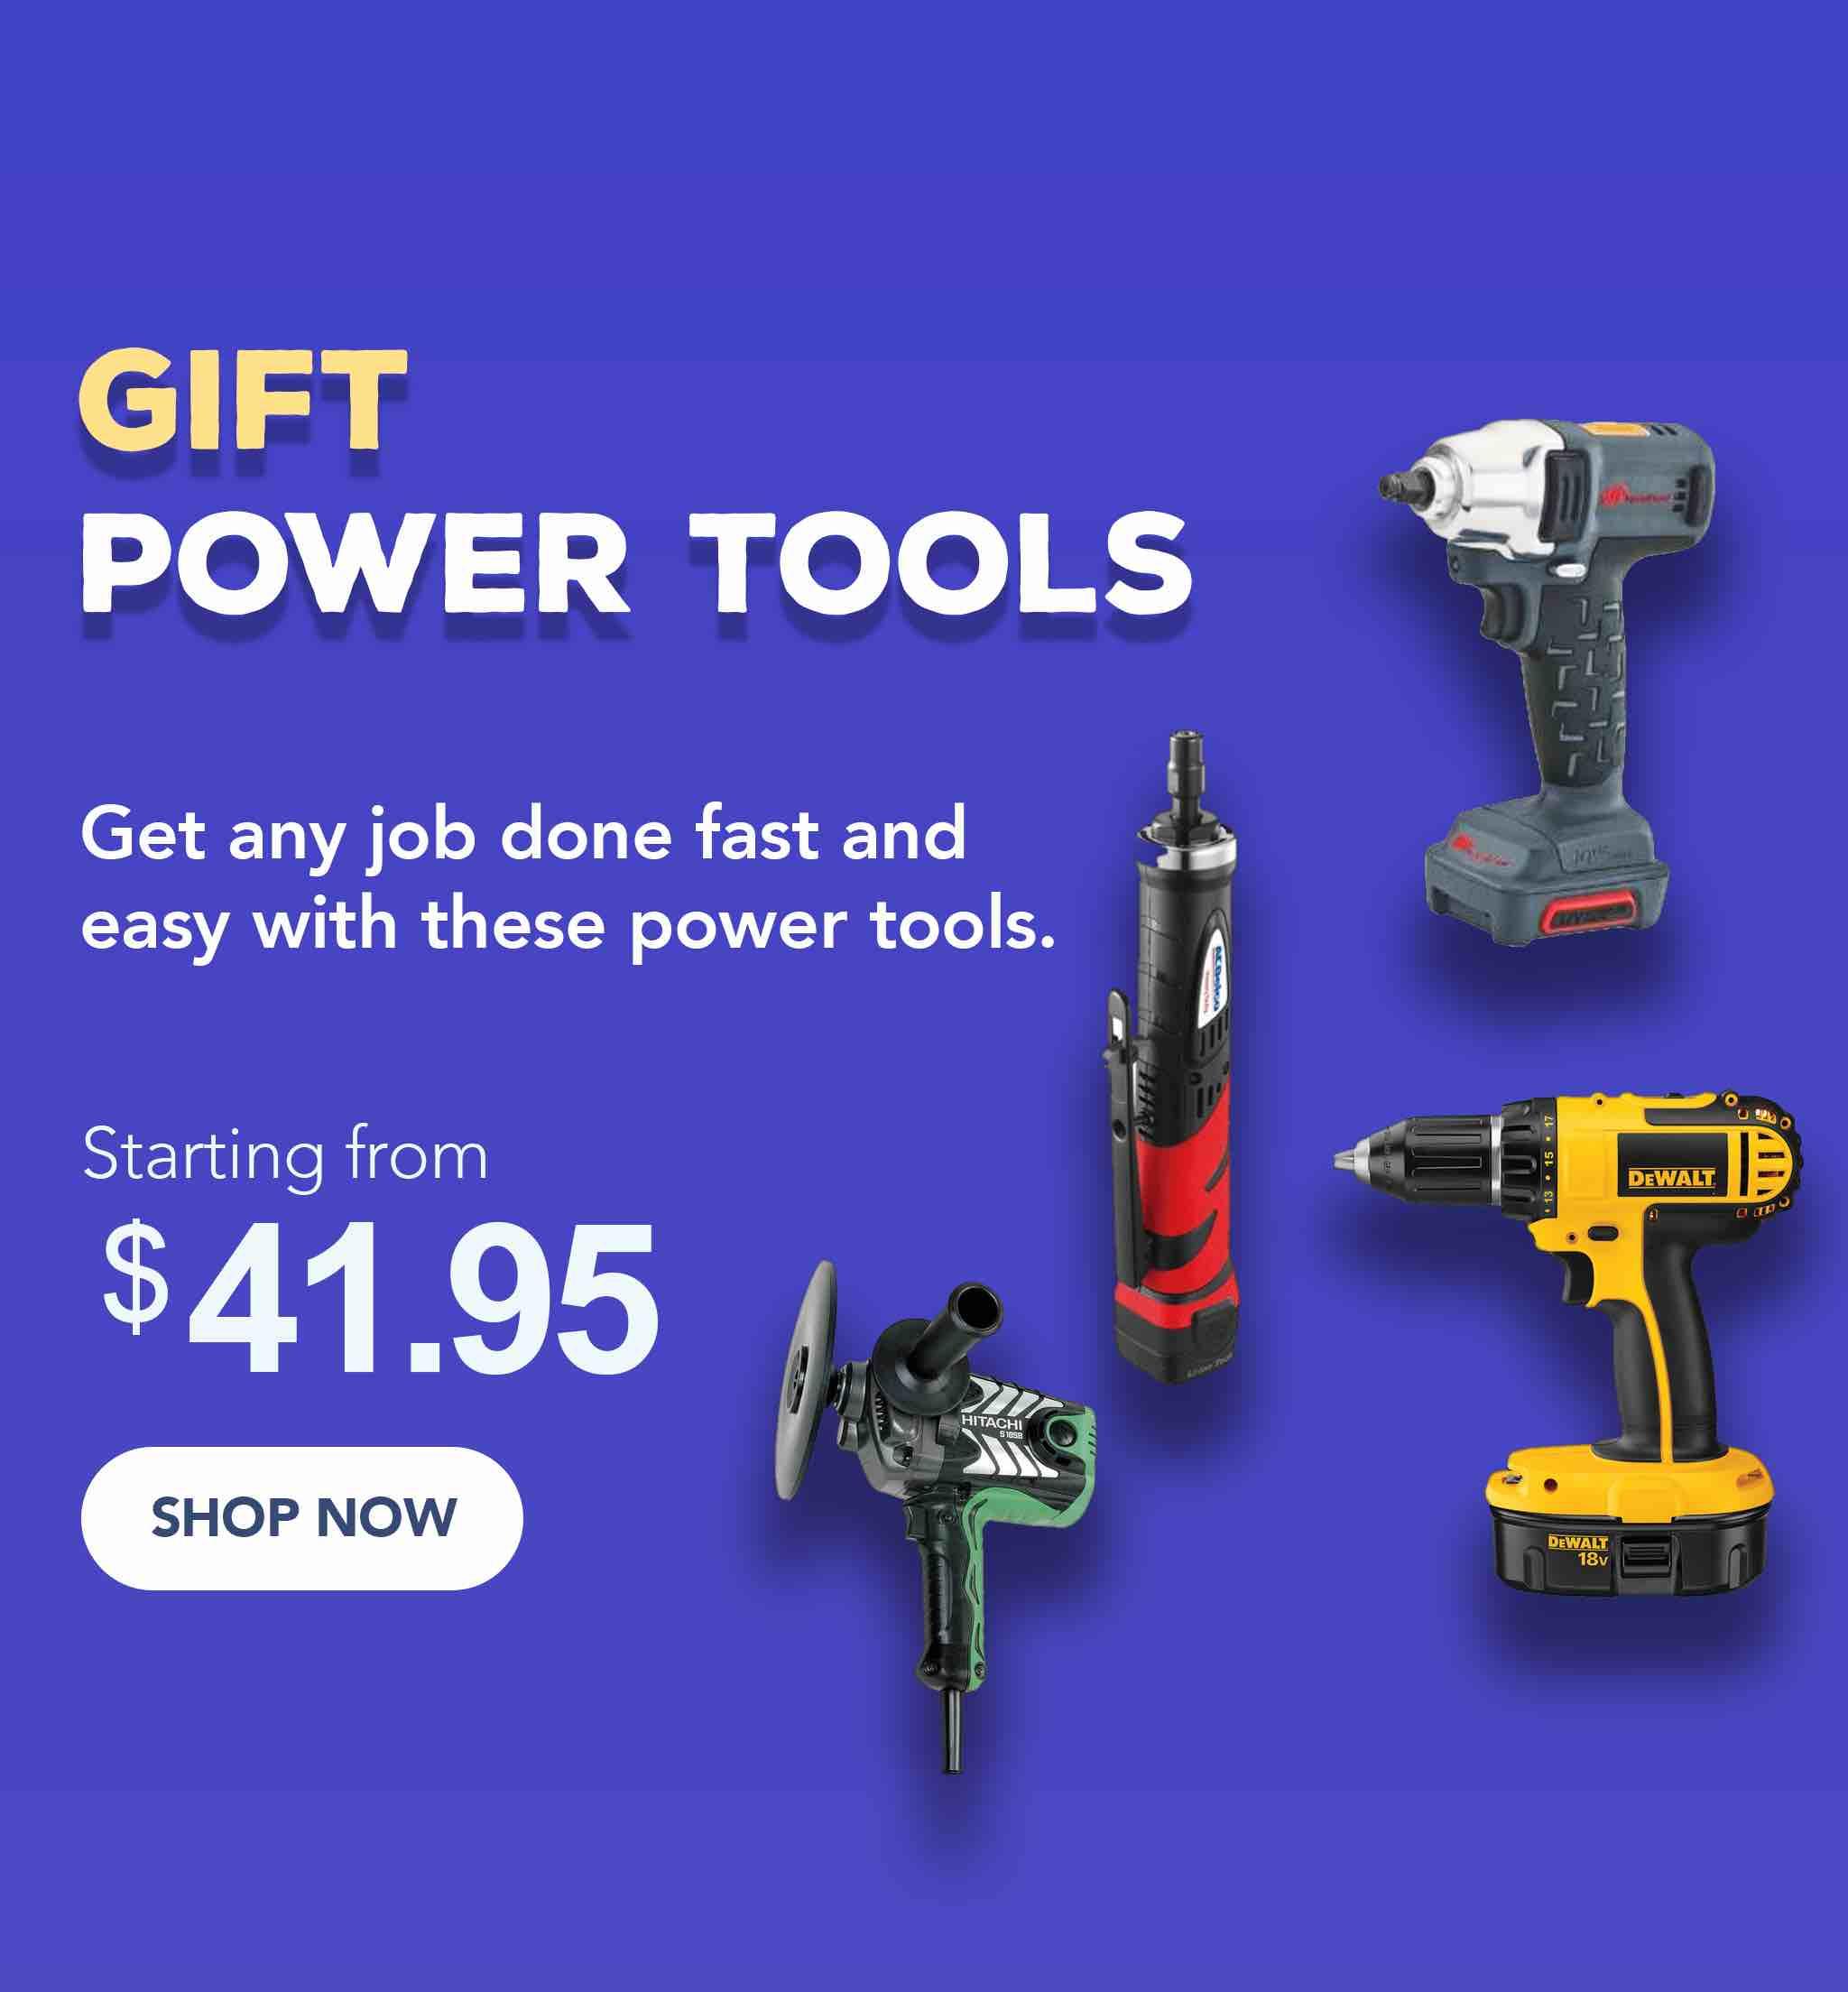 Get any job fast and easy with these power tools